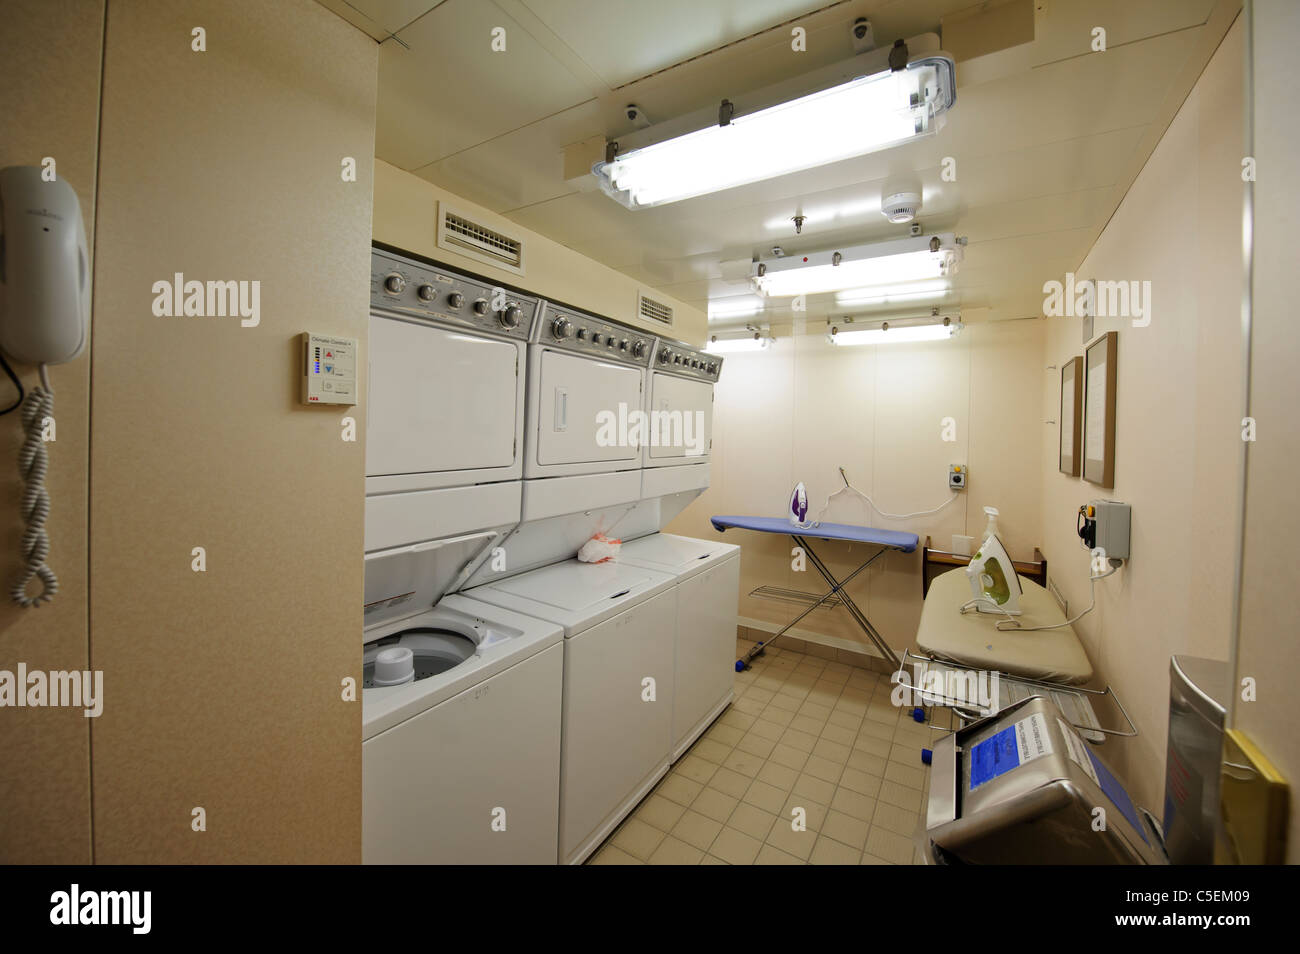 laundry-room-deck-4-queen-mary-2-cruise-ship-C5EM09.jpg